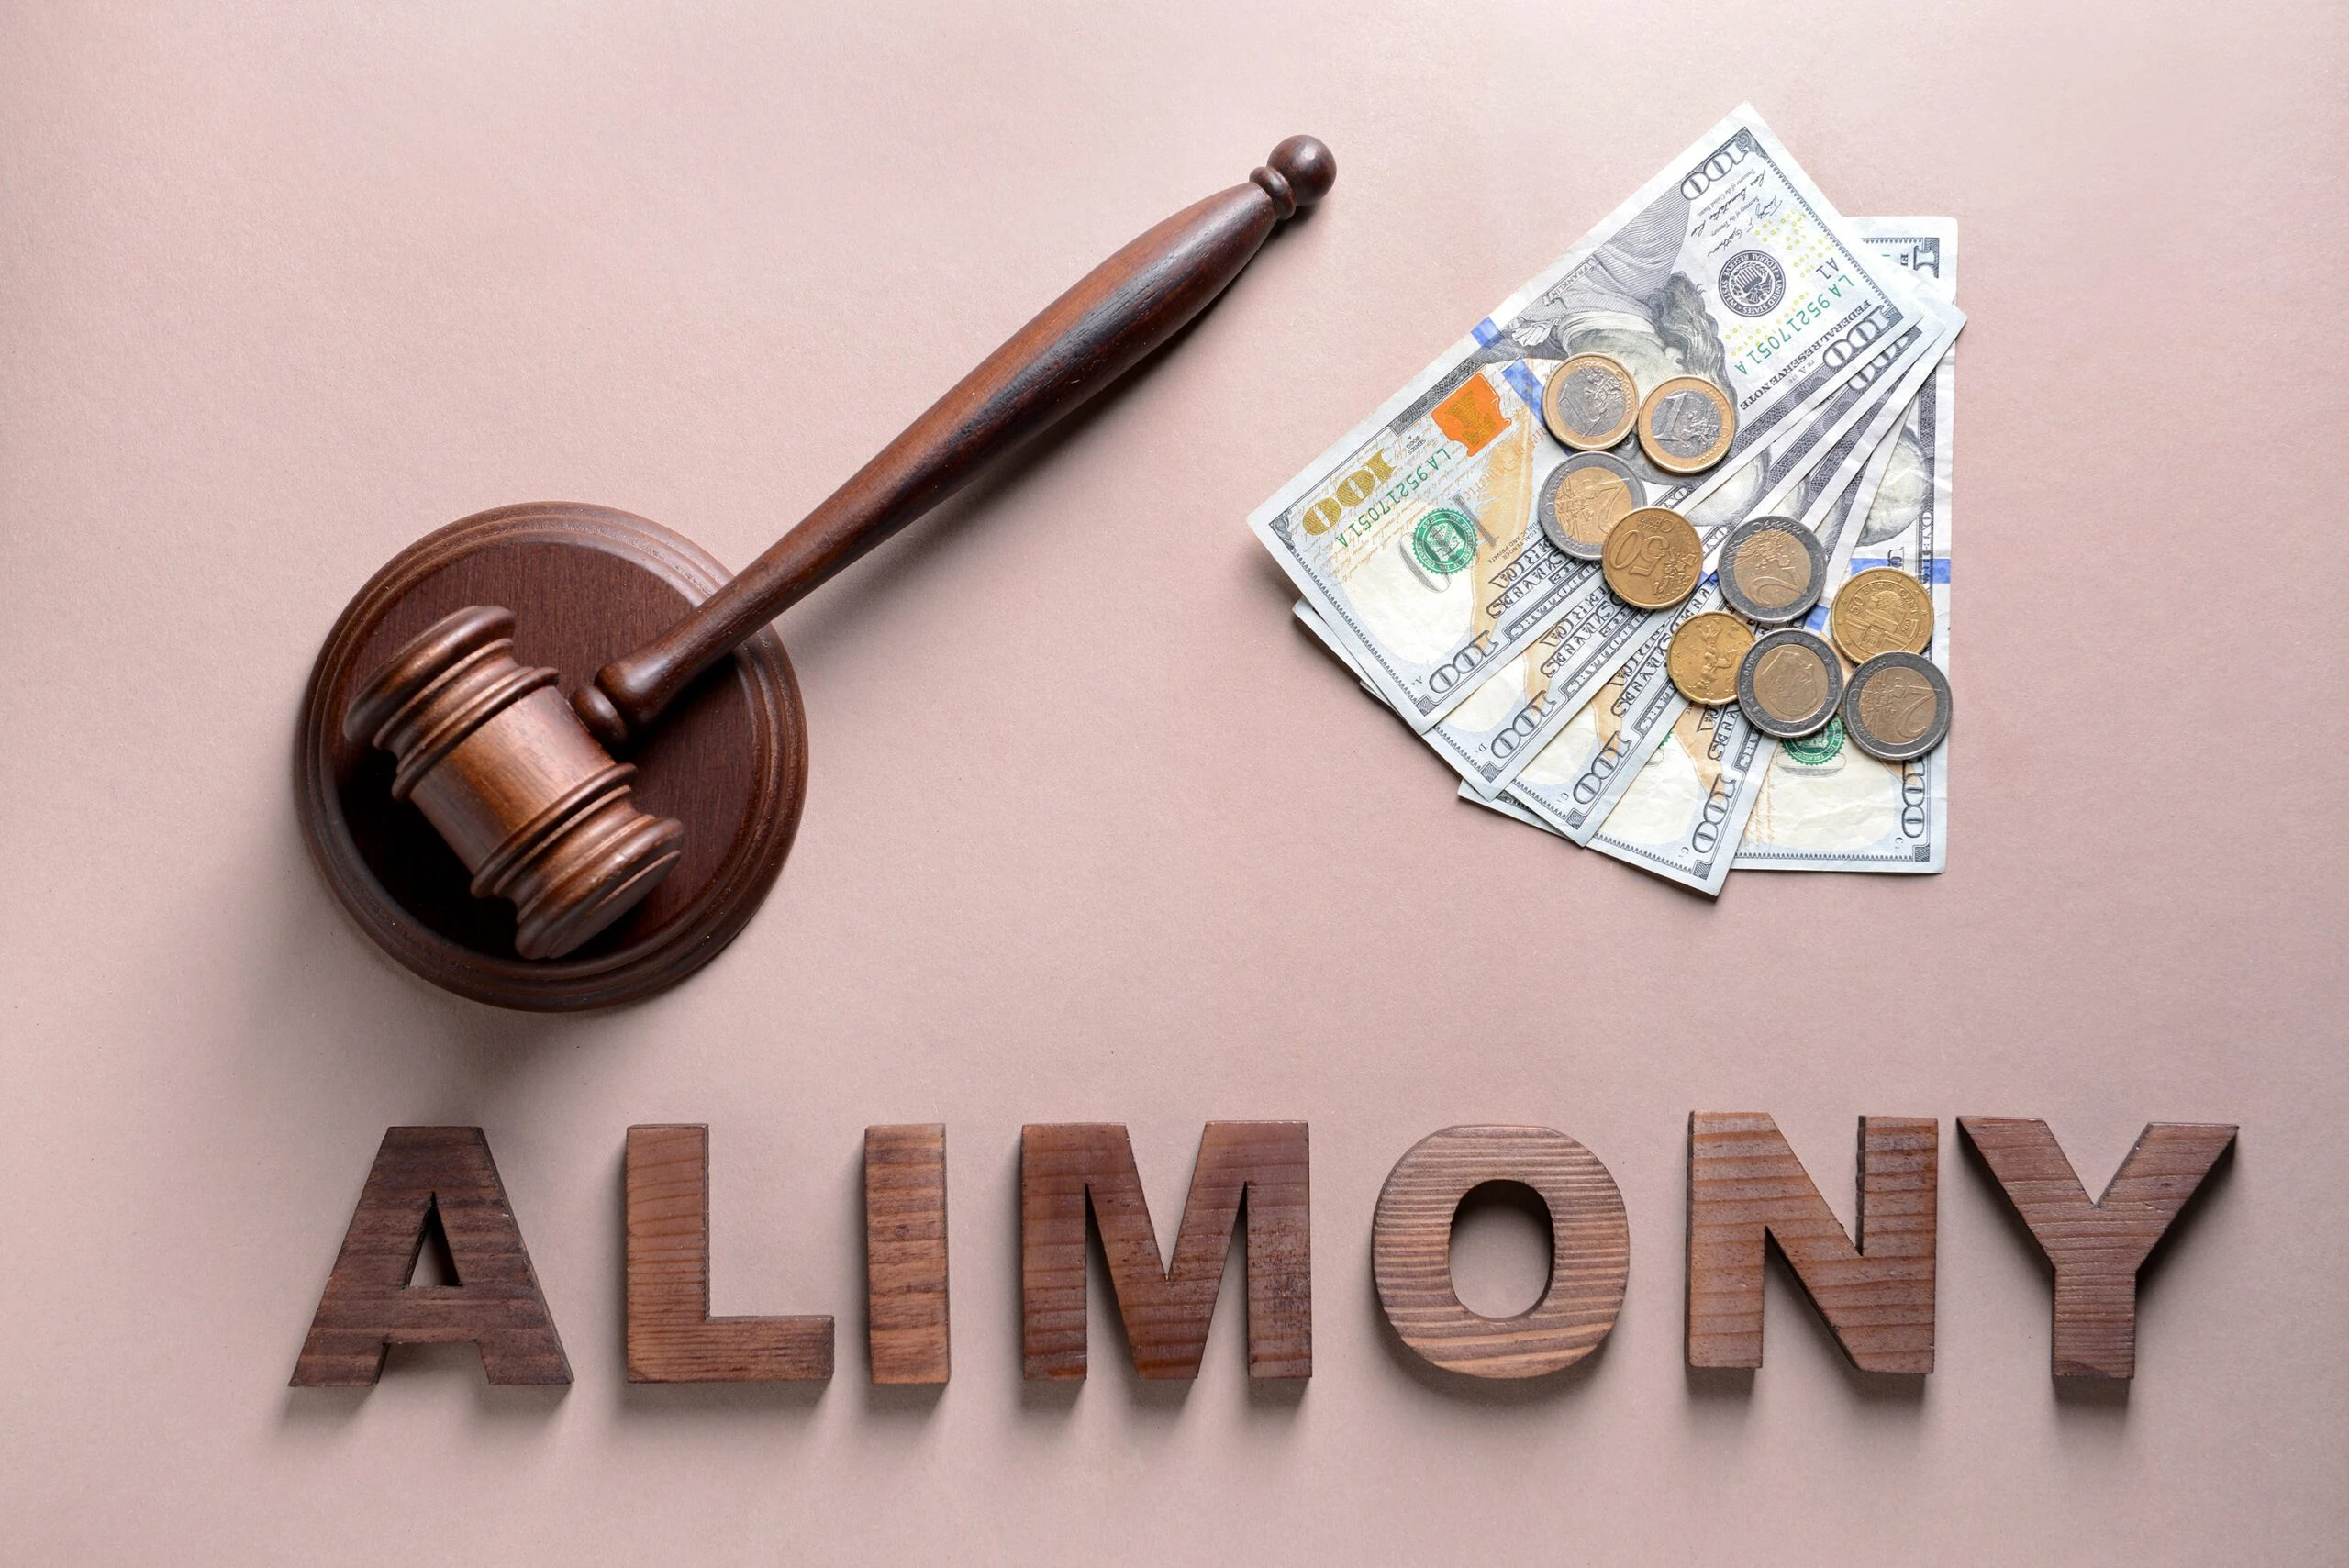 “Alimony” written in block letters with judge gavel and stack of money. A Houston alimony attorney can help you reach a fair alimony agreement.